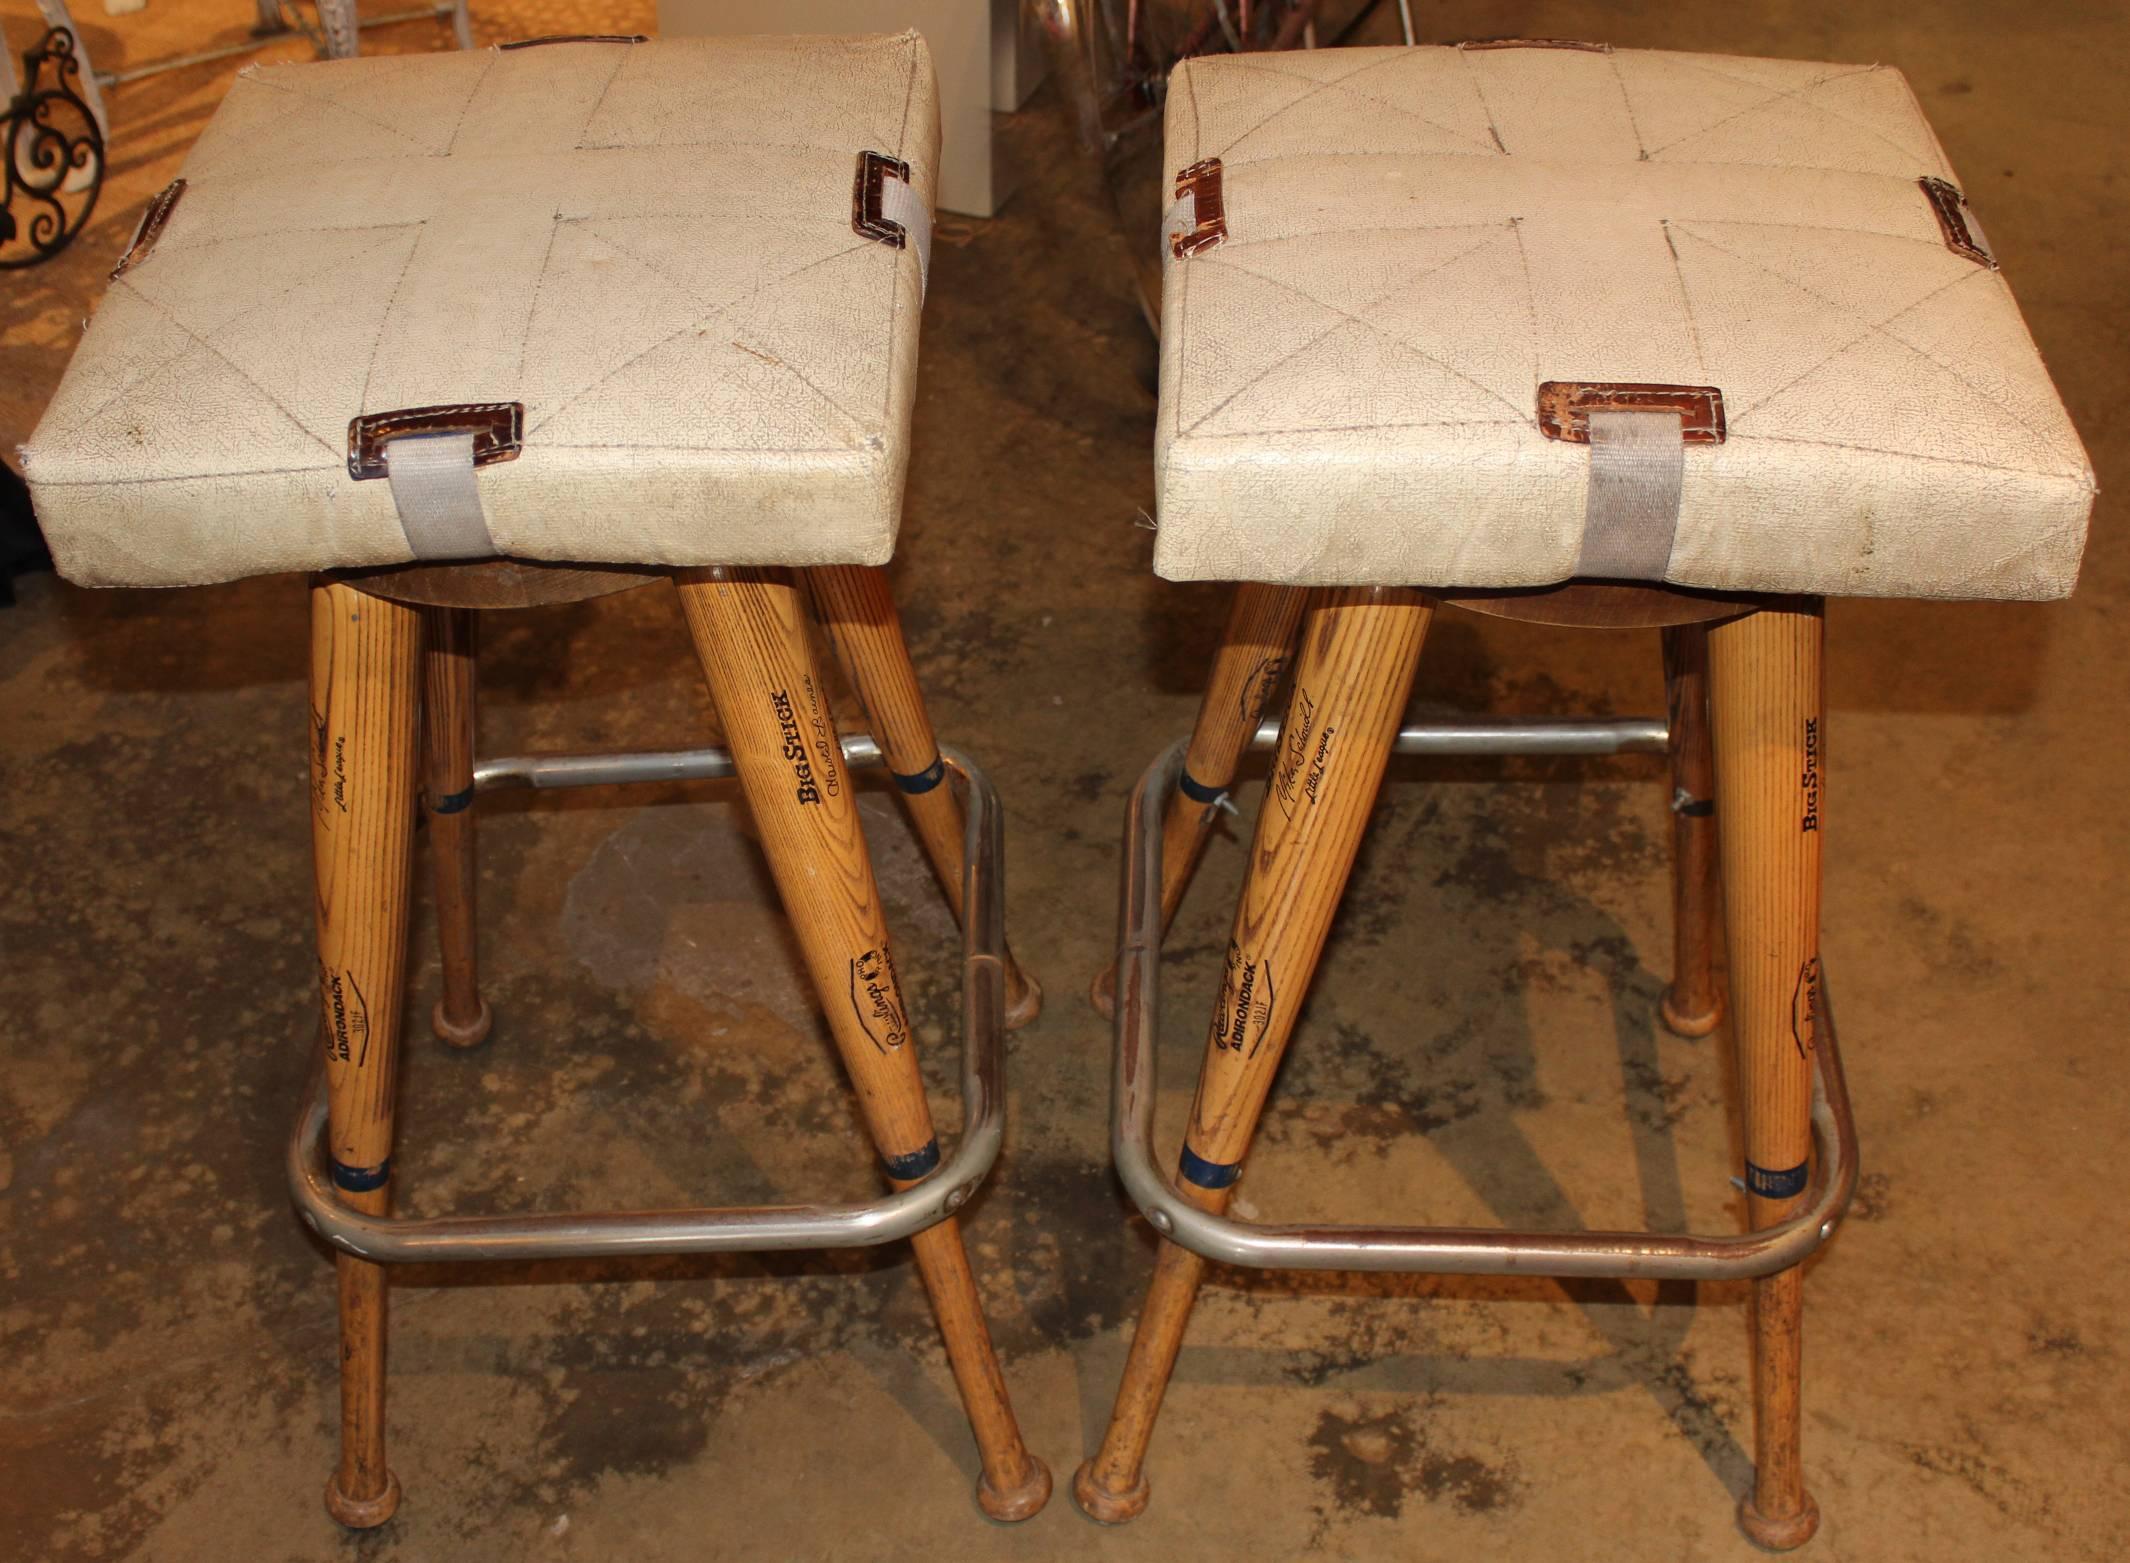 A wonderful custom pair of bar stools constructed with baseball bat legs and actual bases for seat pads, each attached to a round wooden seat. The bats used are rawlings adirondack pro ring big stick little league bats with several 1980s pro